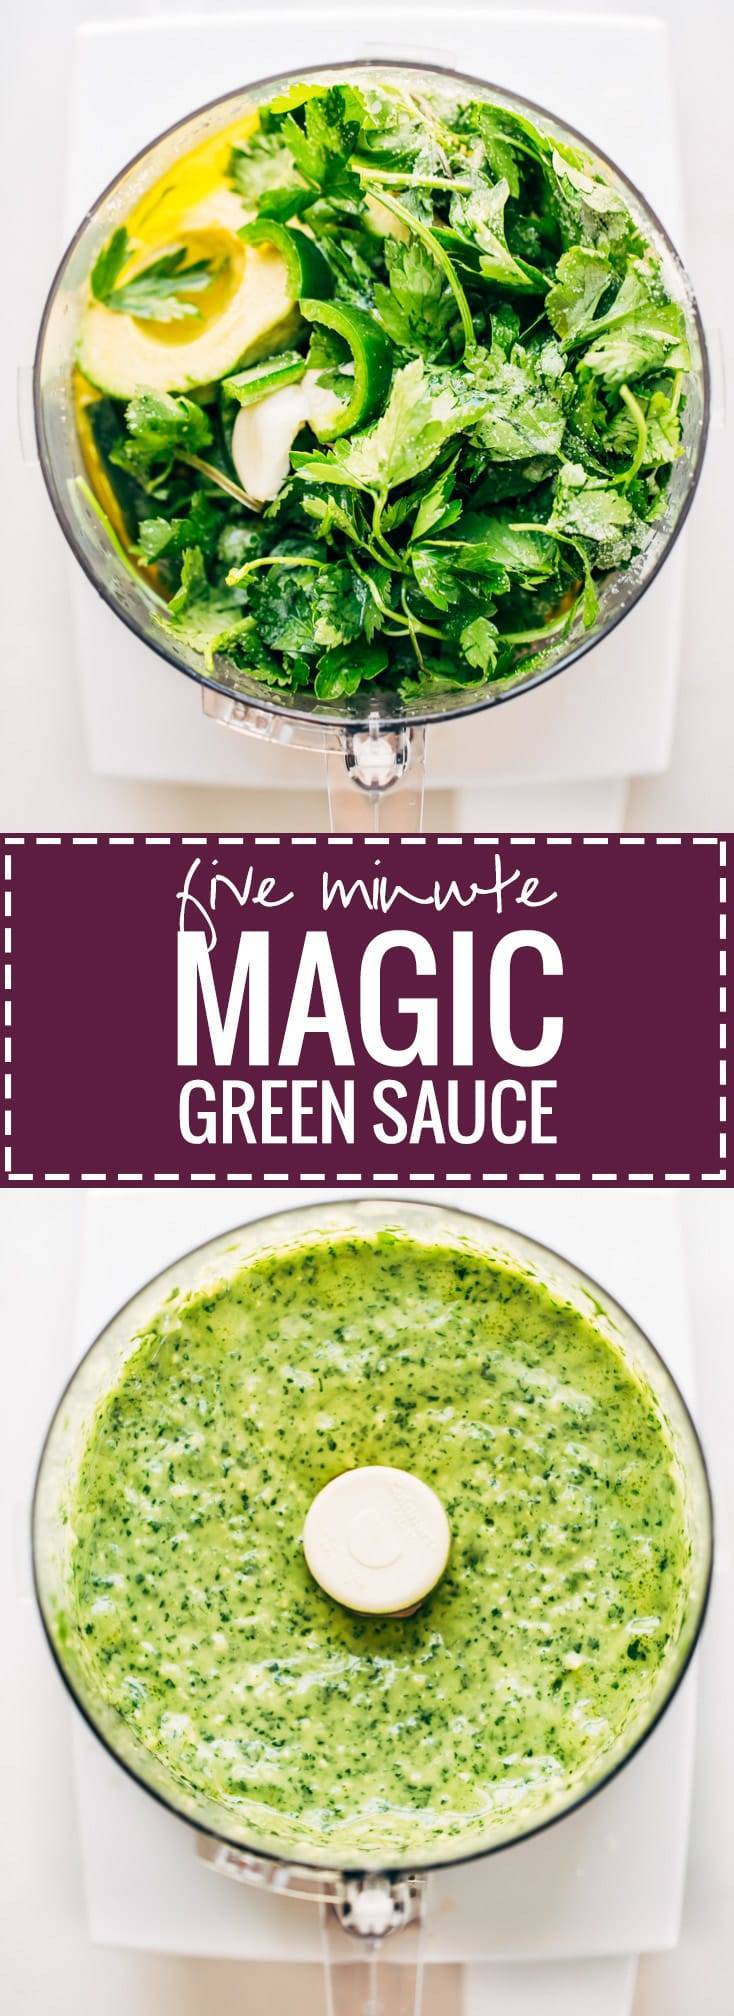 5 Minute Magic Green Sauce - use on salads, with chicken, or just as a dip! Easy ingredients like parsley, cilantro, avocado, garlic, and lime. Vegan!